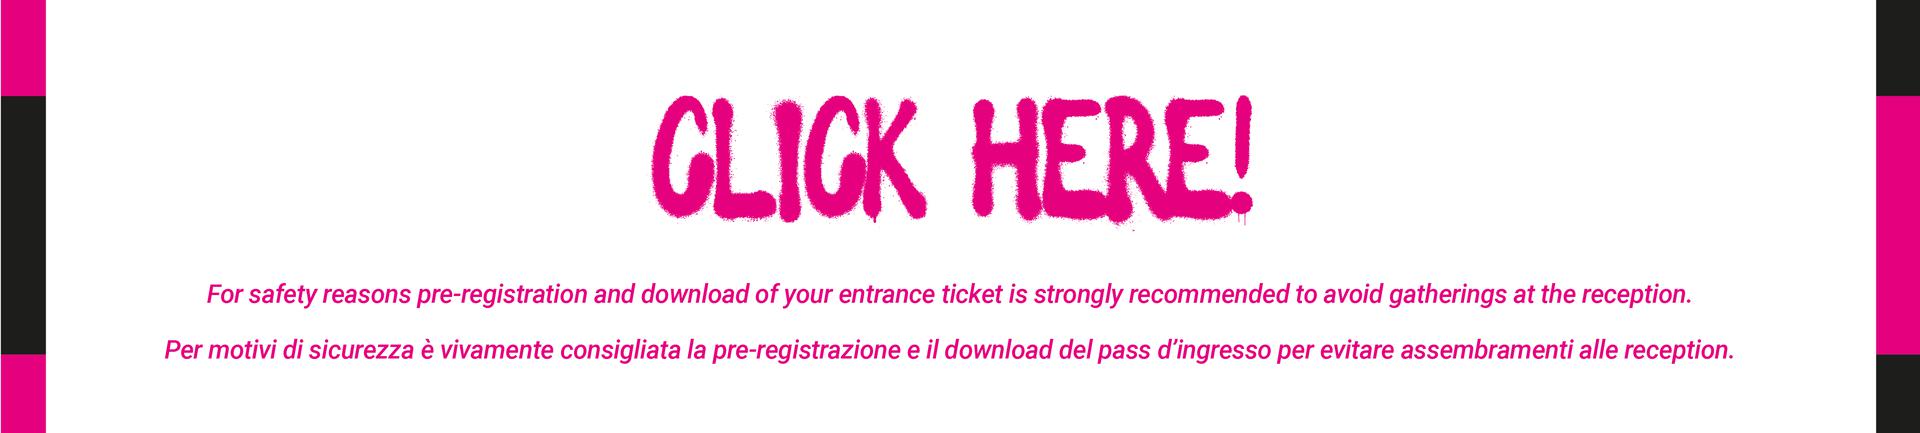 CLICK HERE TO DOWNLOAD YOUR ENTRANCE TICKET! / CLICCA QUI PER SCARICARE IL TUO PASS D'INGRESSO!